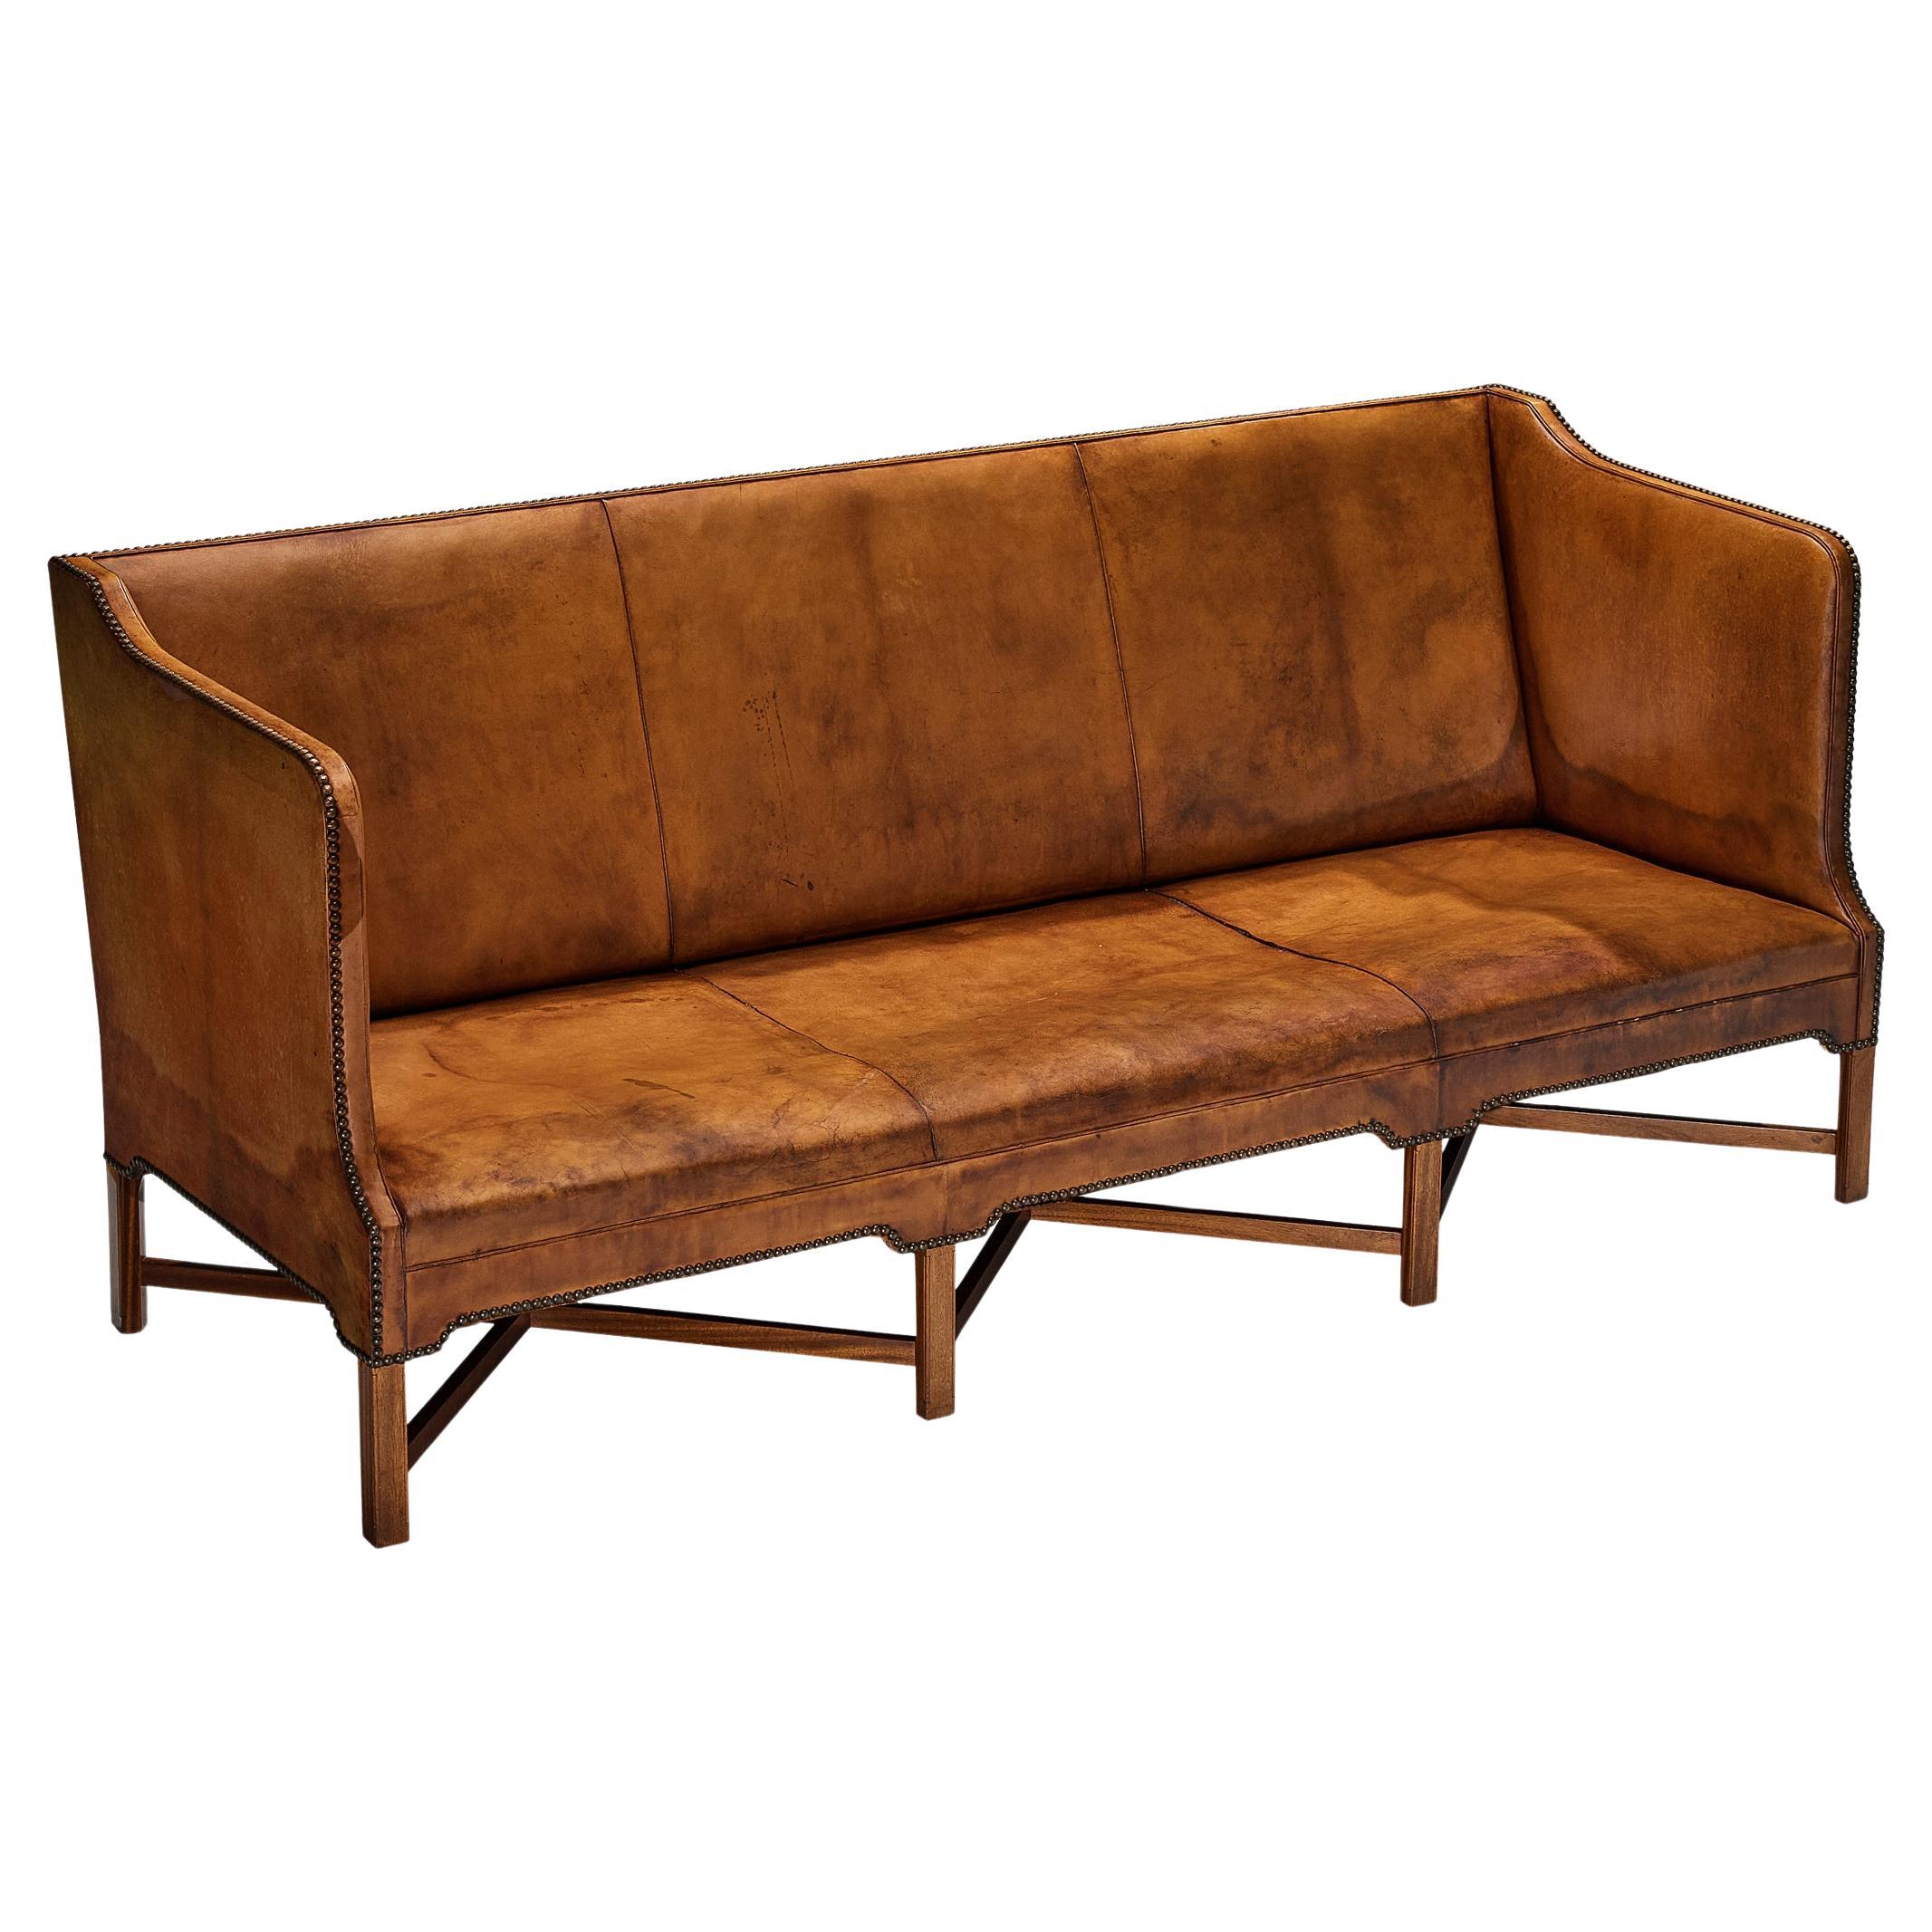 Kaare Klint for Rud Rasmussen Sofa in Original Niger Leather and Mahogany  For Sale